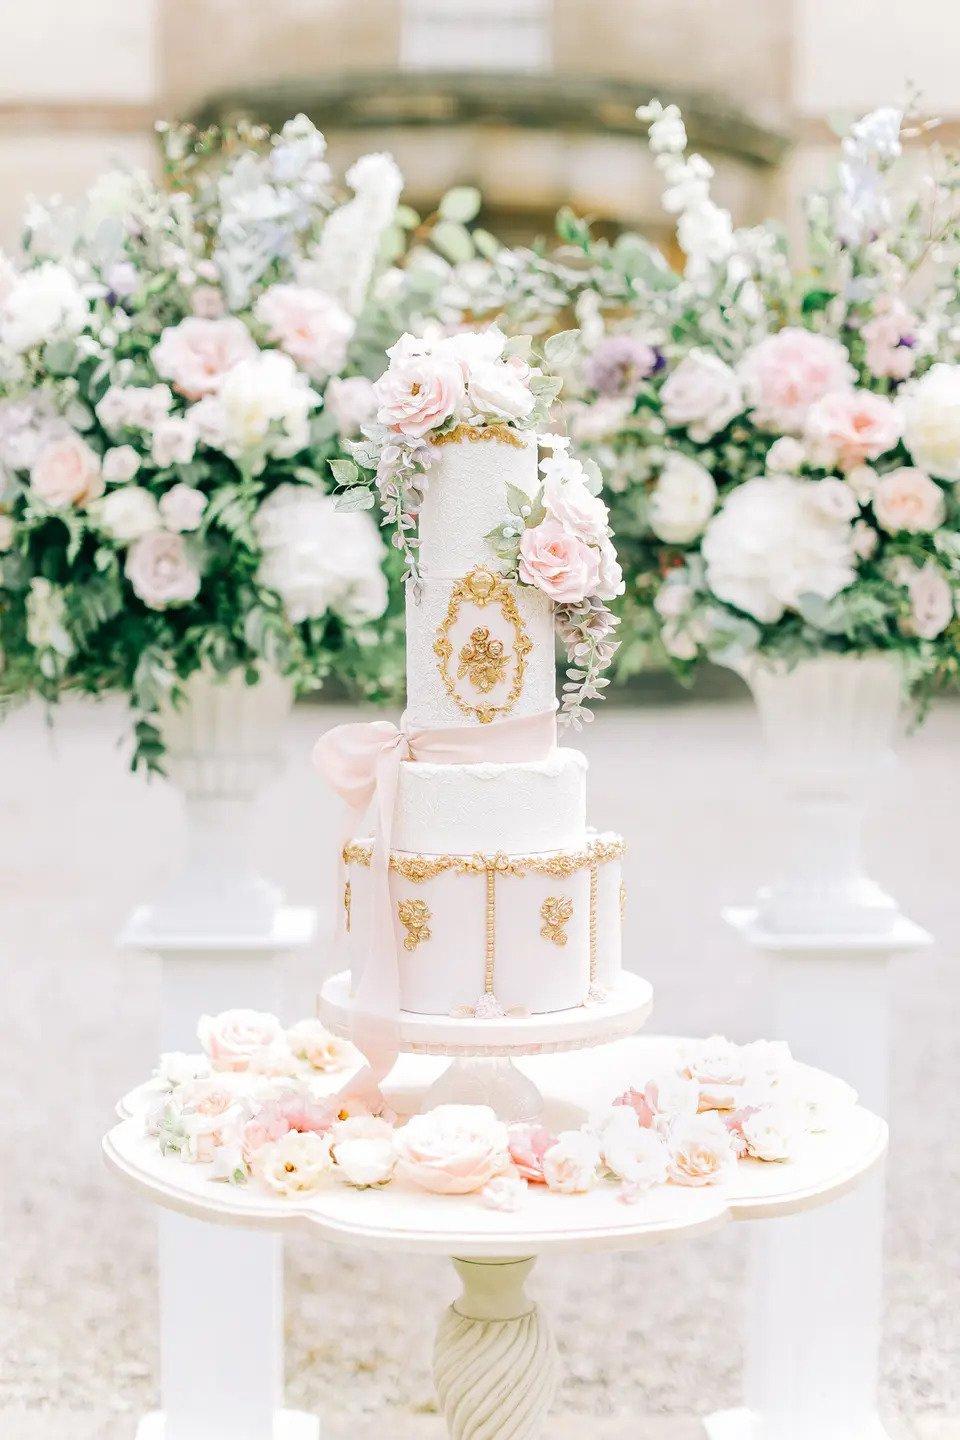 white and gold fairytale wedding cake with five tiers and gold icing